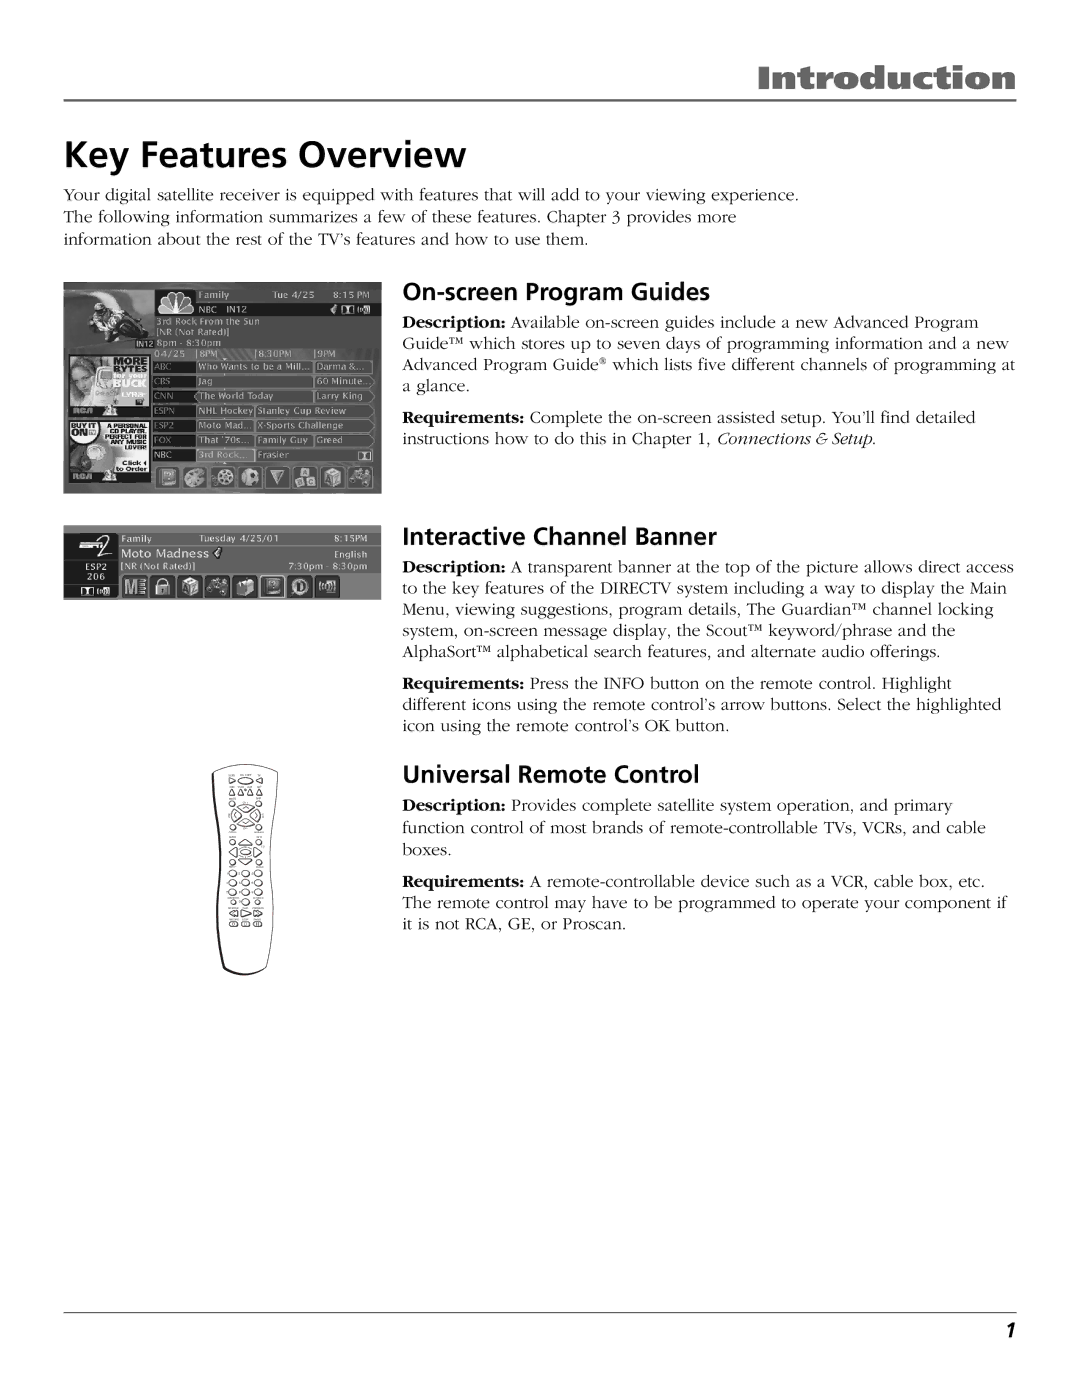 RCA Satellite TV System manual Key Features Overview, On-screen Program Guides, Interactive Channel Banner 